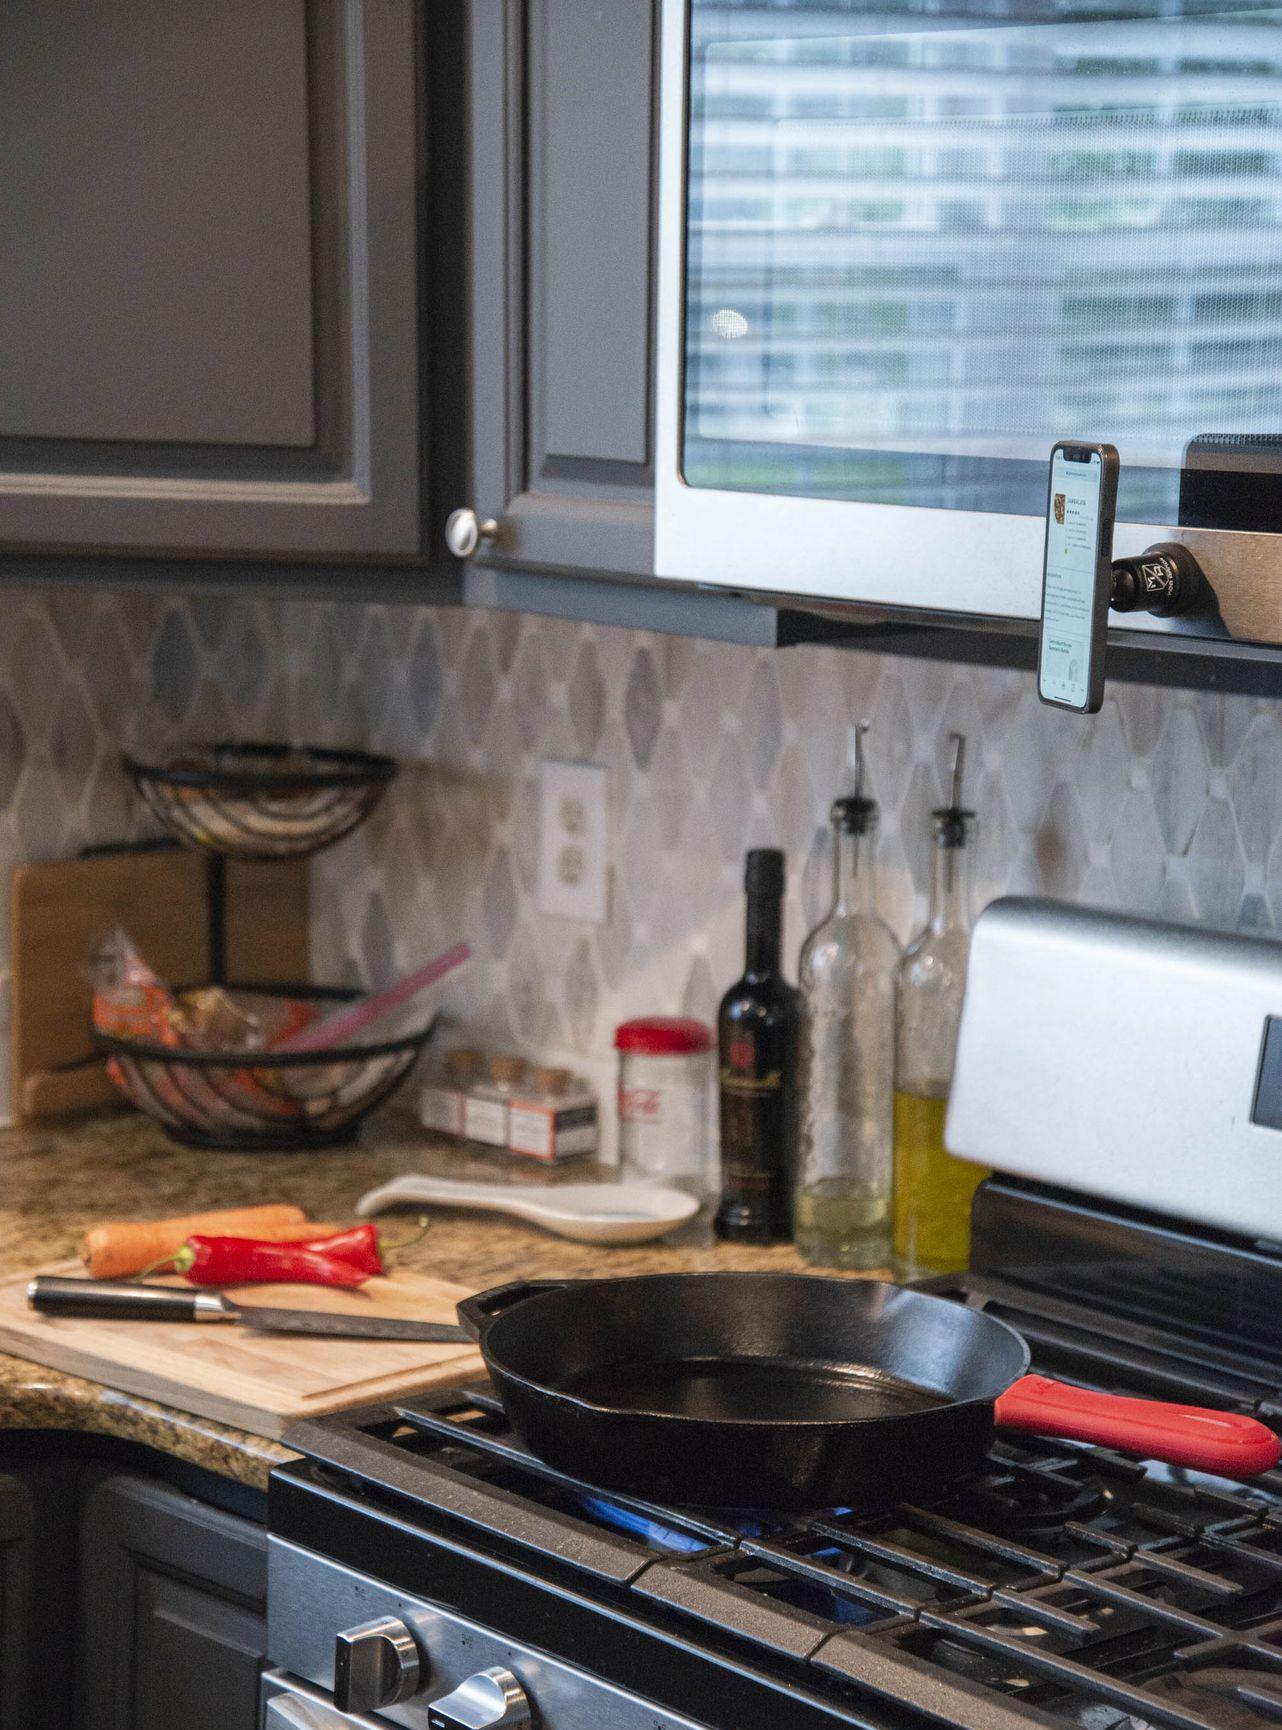 phone mounted on to MobNetic Maxx inside kitchen while cooking